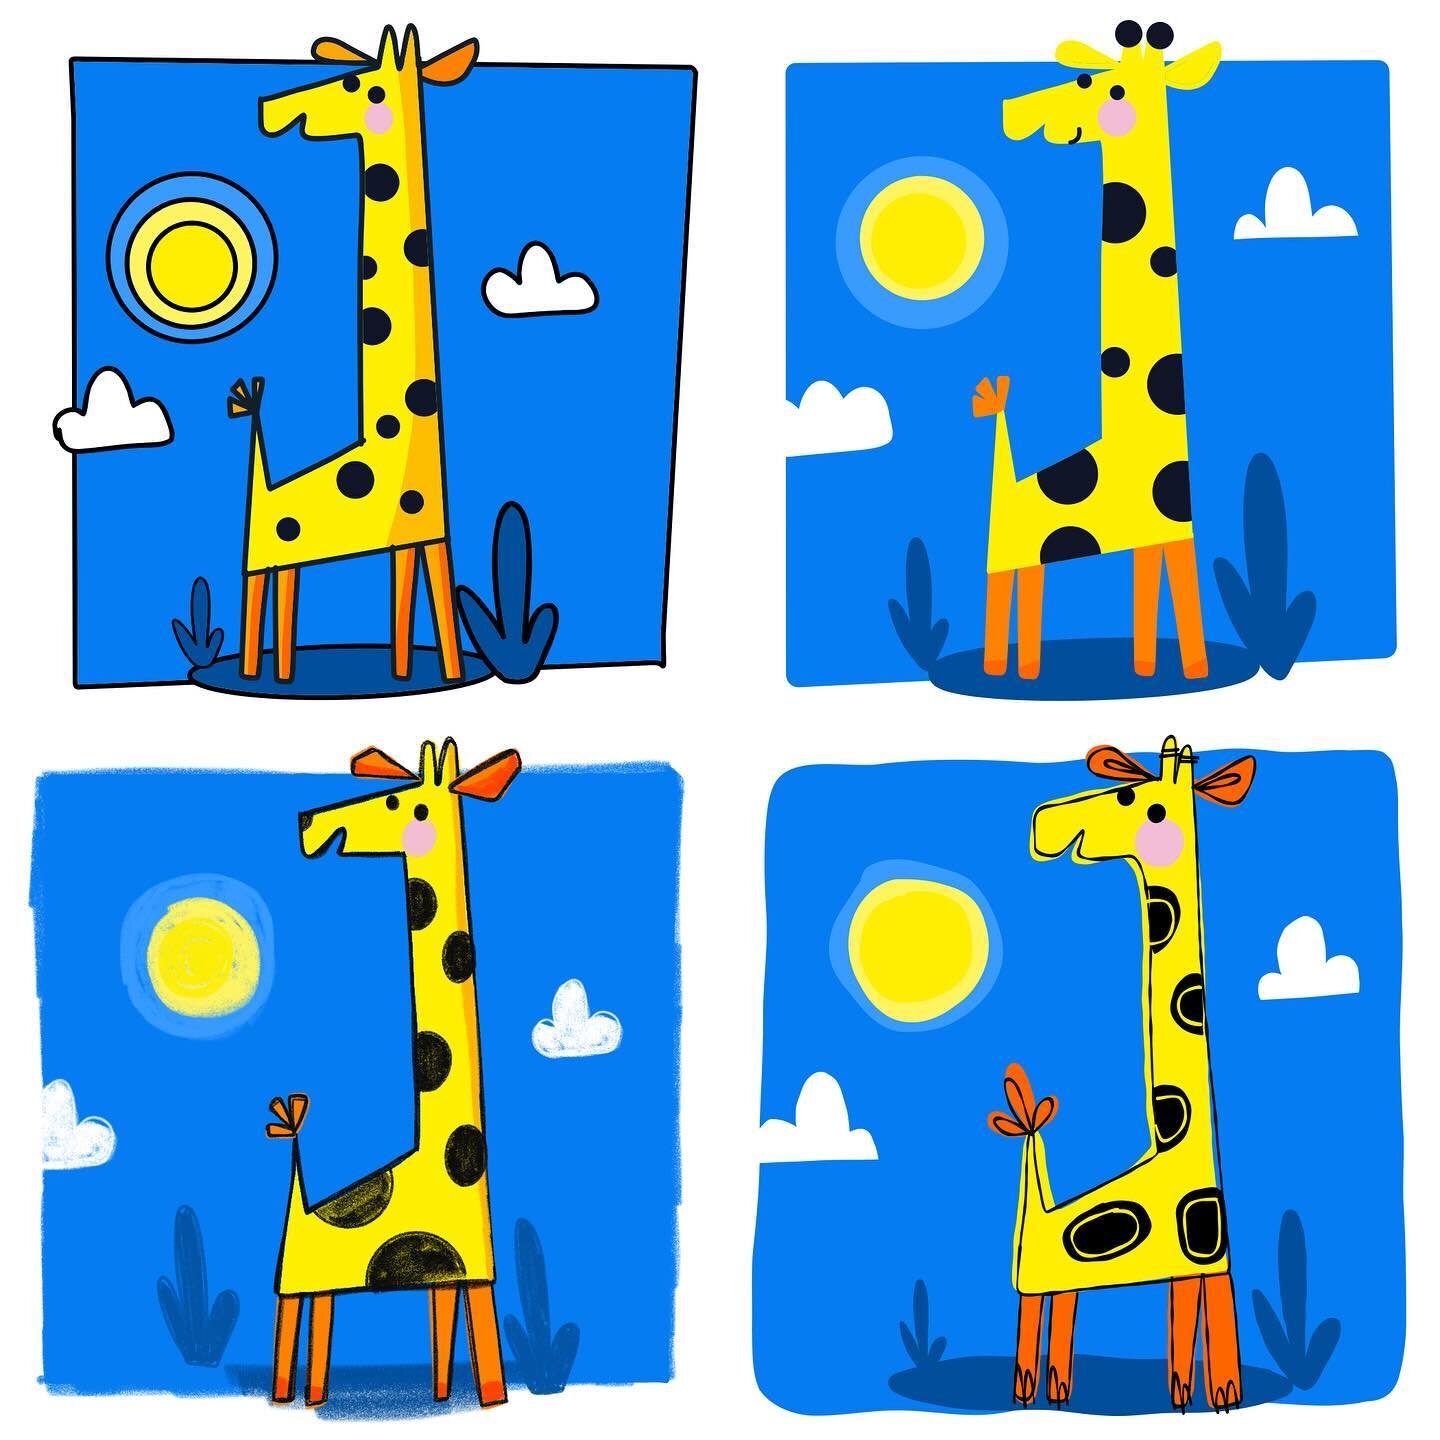 4 different styles of drawing the same 🦒 I&rsquo;ve assigned this lil exercise to my students so they can 𝒆𝒙𝒑𝒍𝒐𝒓𝒆 𝒂𝒏𝒅 𝒅𝒆𝒗𝒆𝒍𝒐𝒑 𝒕𝒉𝒆𝒊𝒓 𝒐𝒘𝒏 𝒅𝒓𝒂𝒘𝒊𝒏𝒈 𝒔𝒕𝒚𝒍𝒆. I&rsquo;ll be sharing what they come up with 🥰

Meanwhile, Y